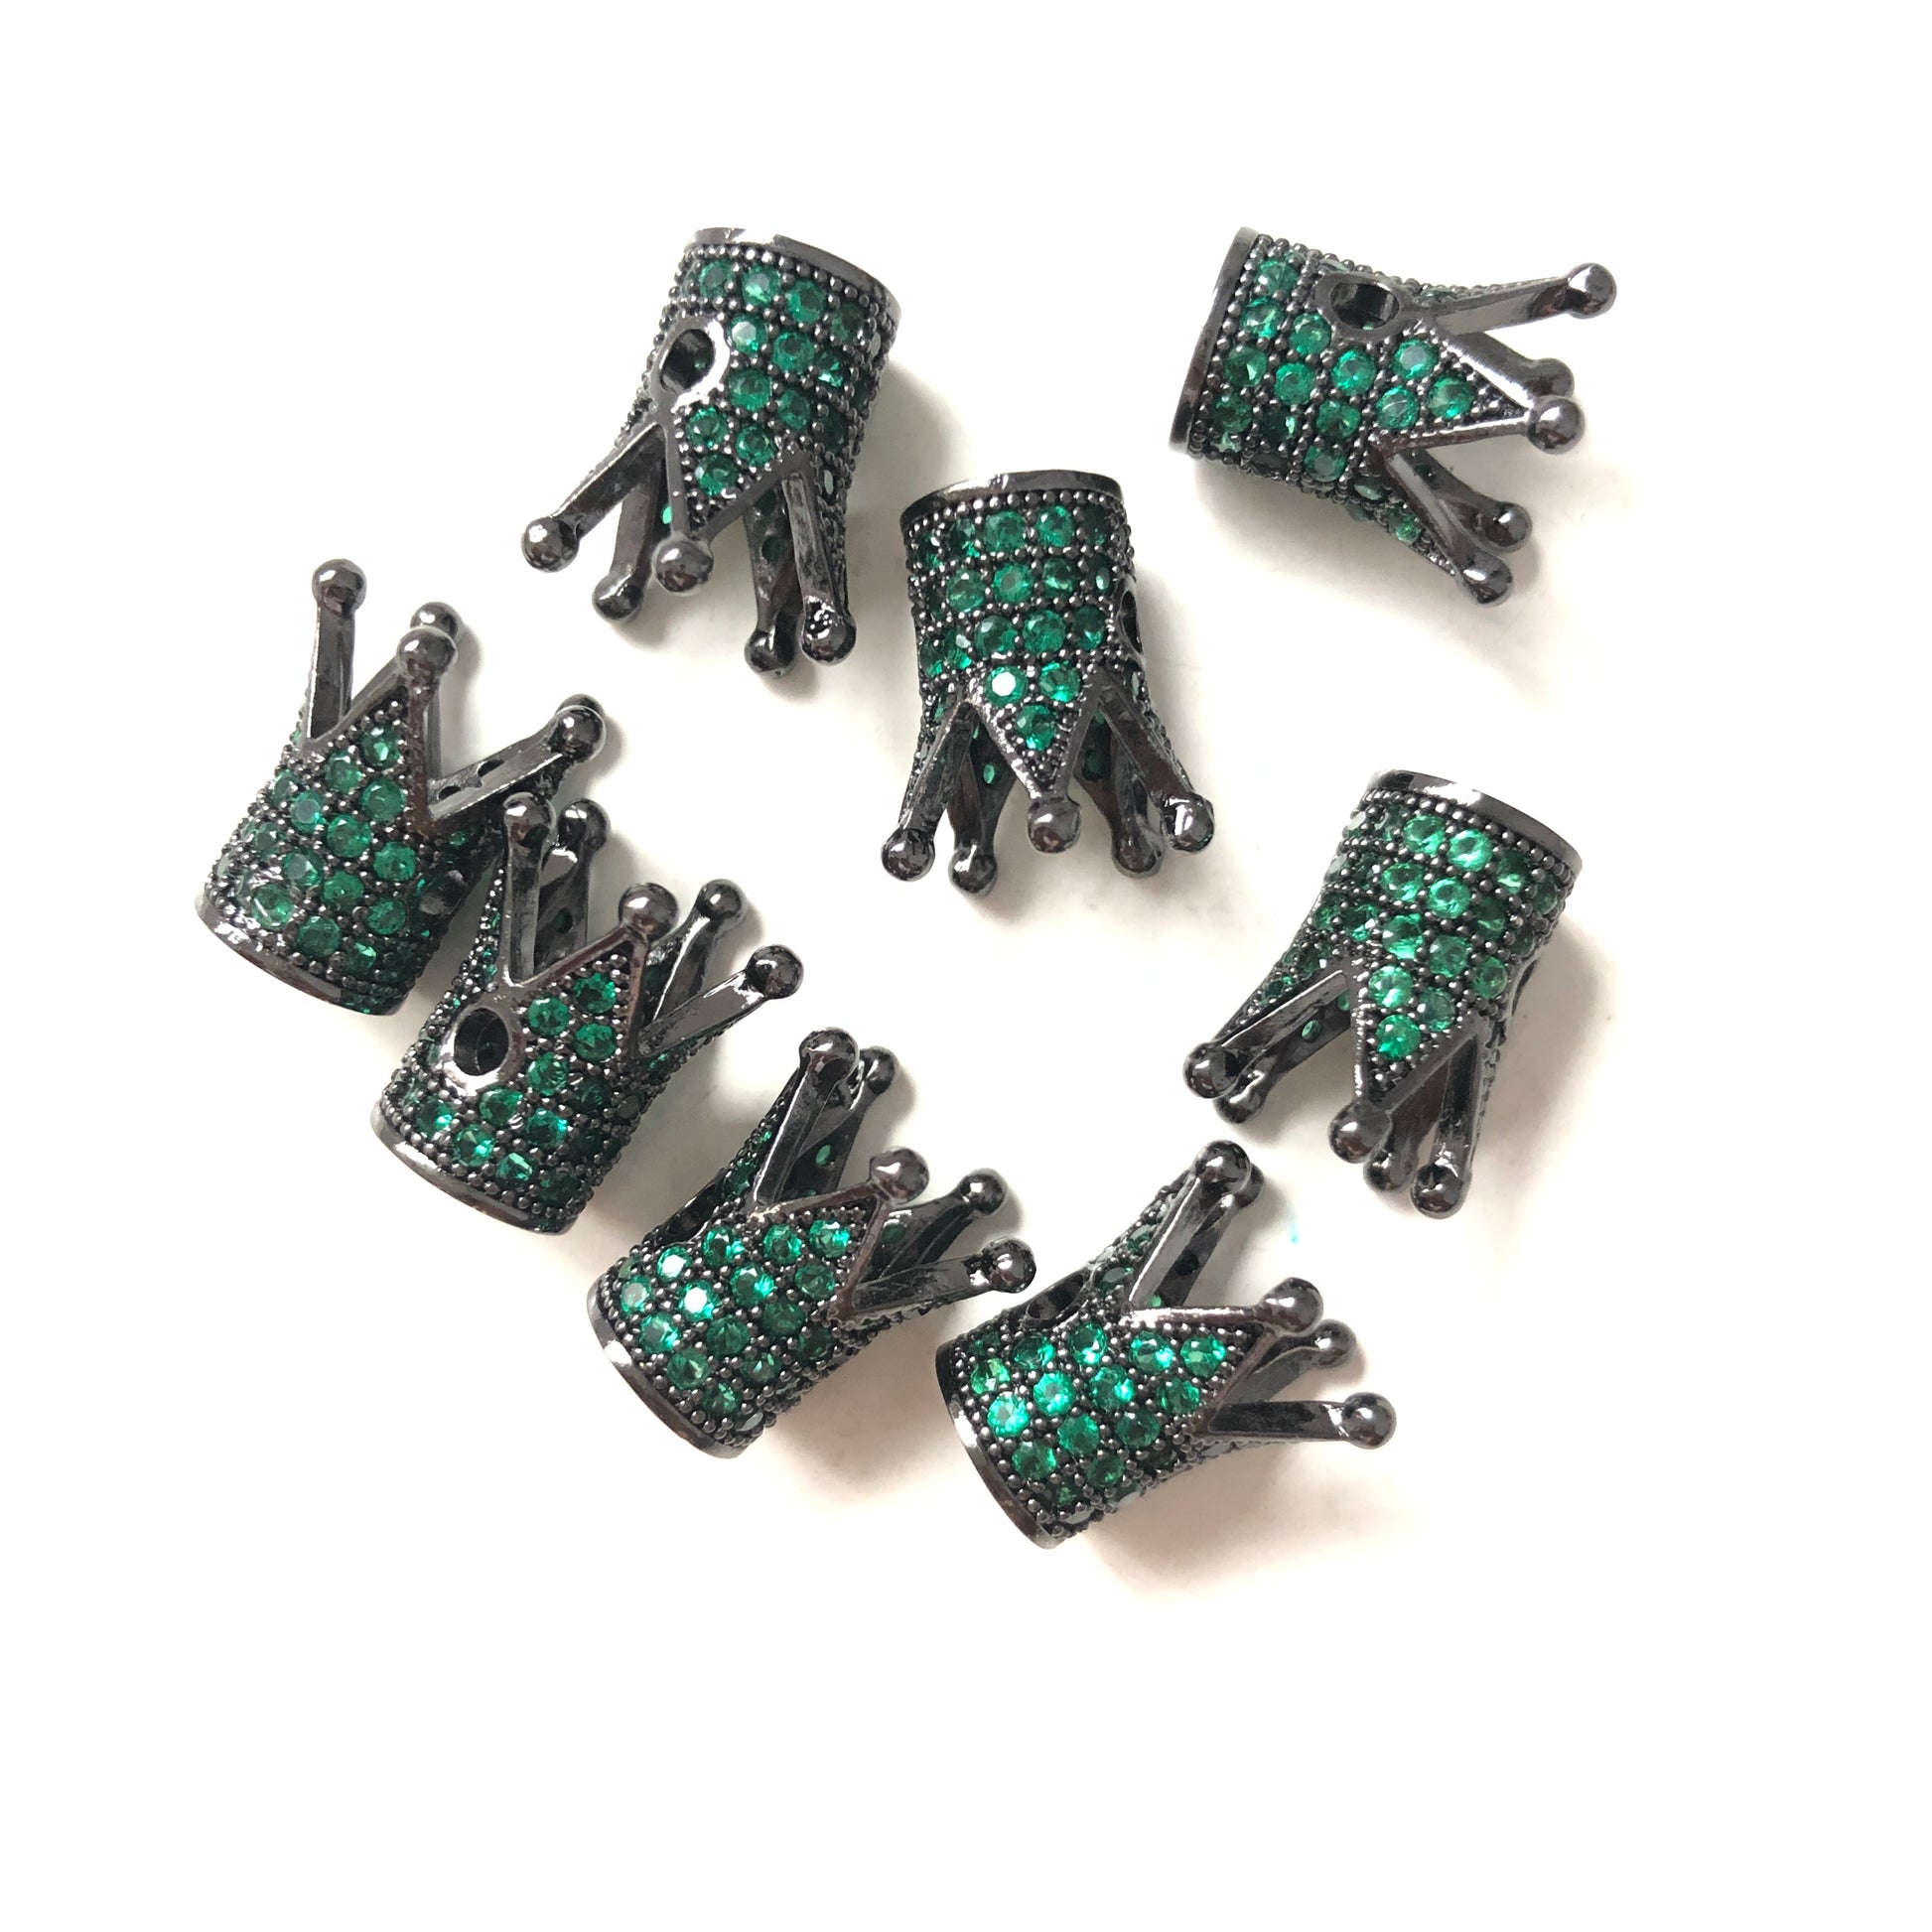 10pcs/lot Green CZ Paved Crown Spacers Black CZ Paved Spacers Colorful Zirconia Crown Beads Charms Beads Beyond